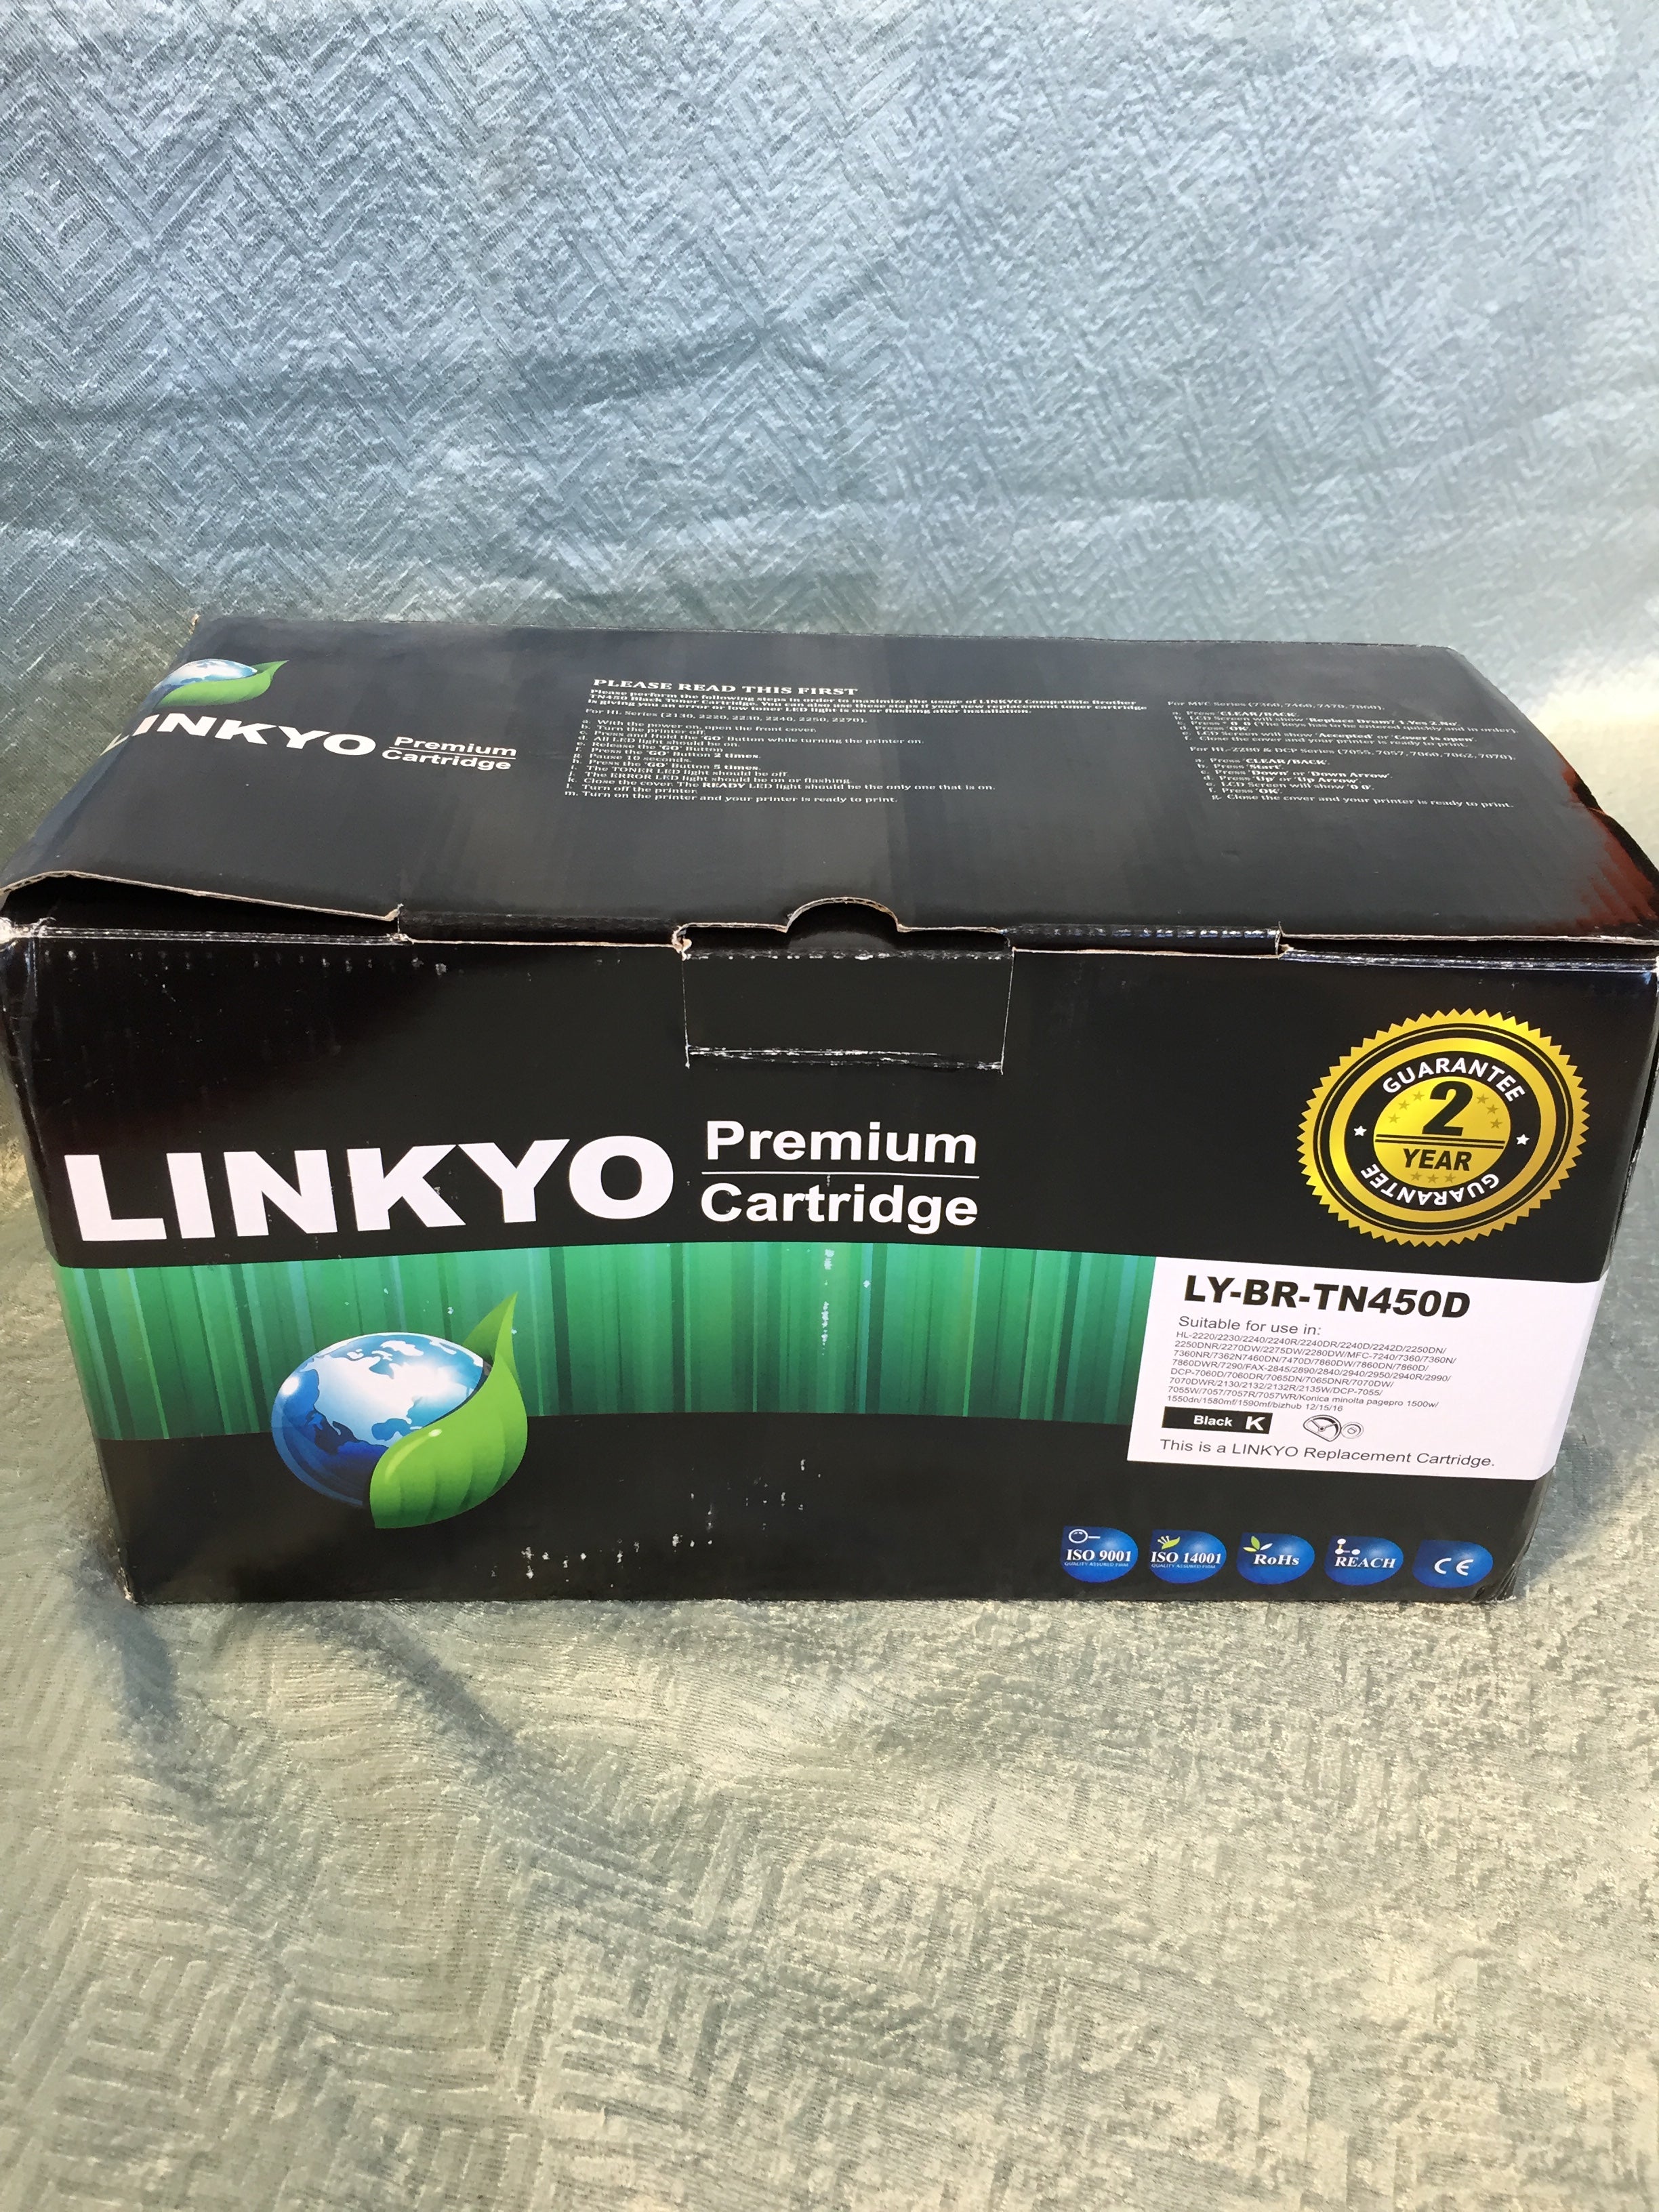 LINKYO Compatible Toner Cartridge for Brother TN450 - Black - 2 Pack (7527896023278)